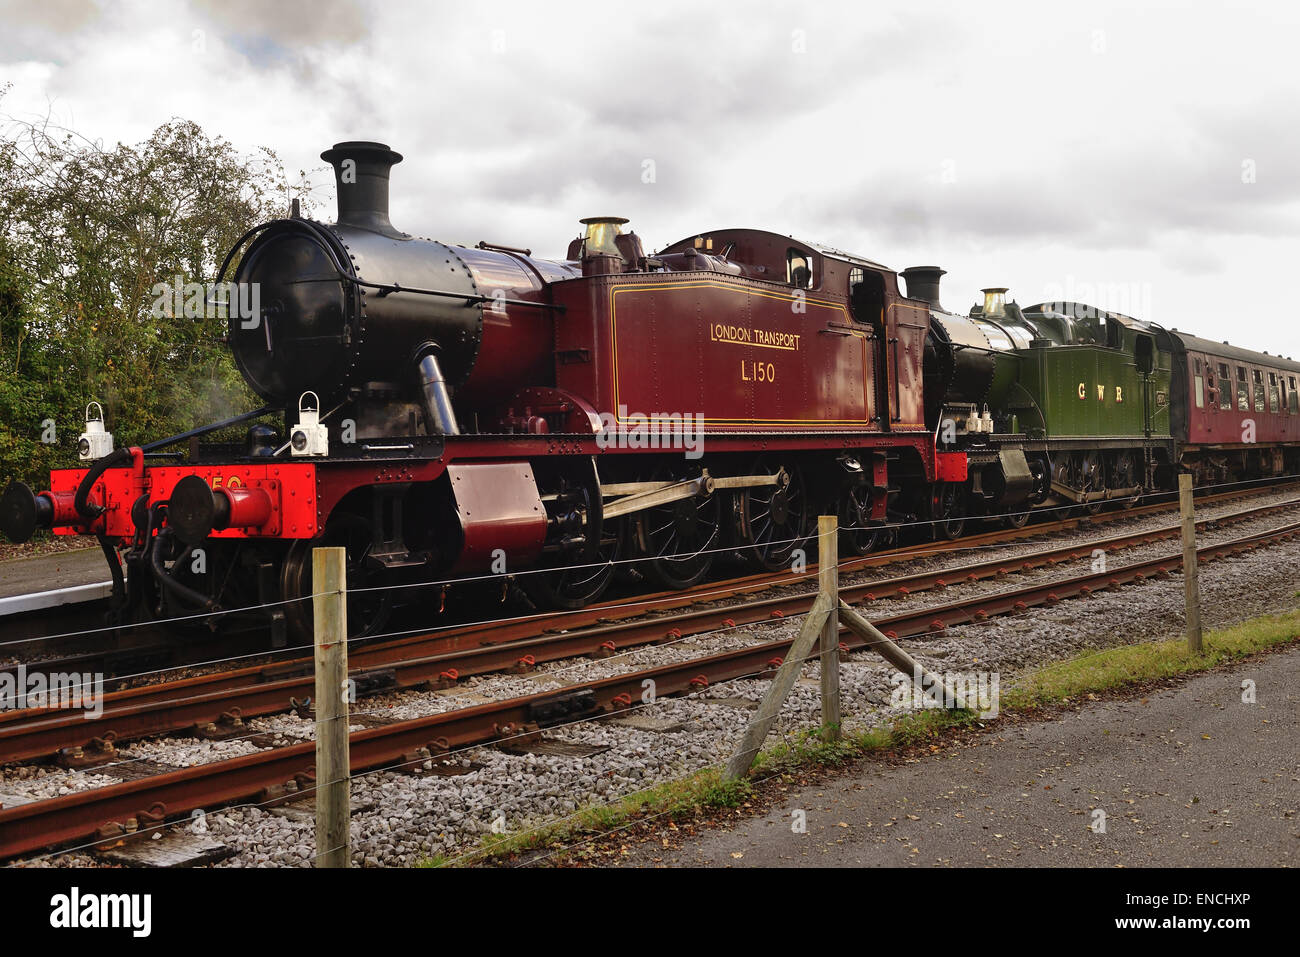 GWR locos No 5521, seen here as No L150, and No 4270 waiting to double head a train to Bitton. Stock Photo